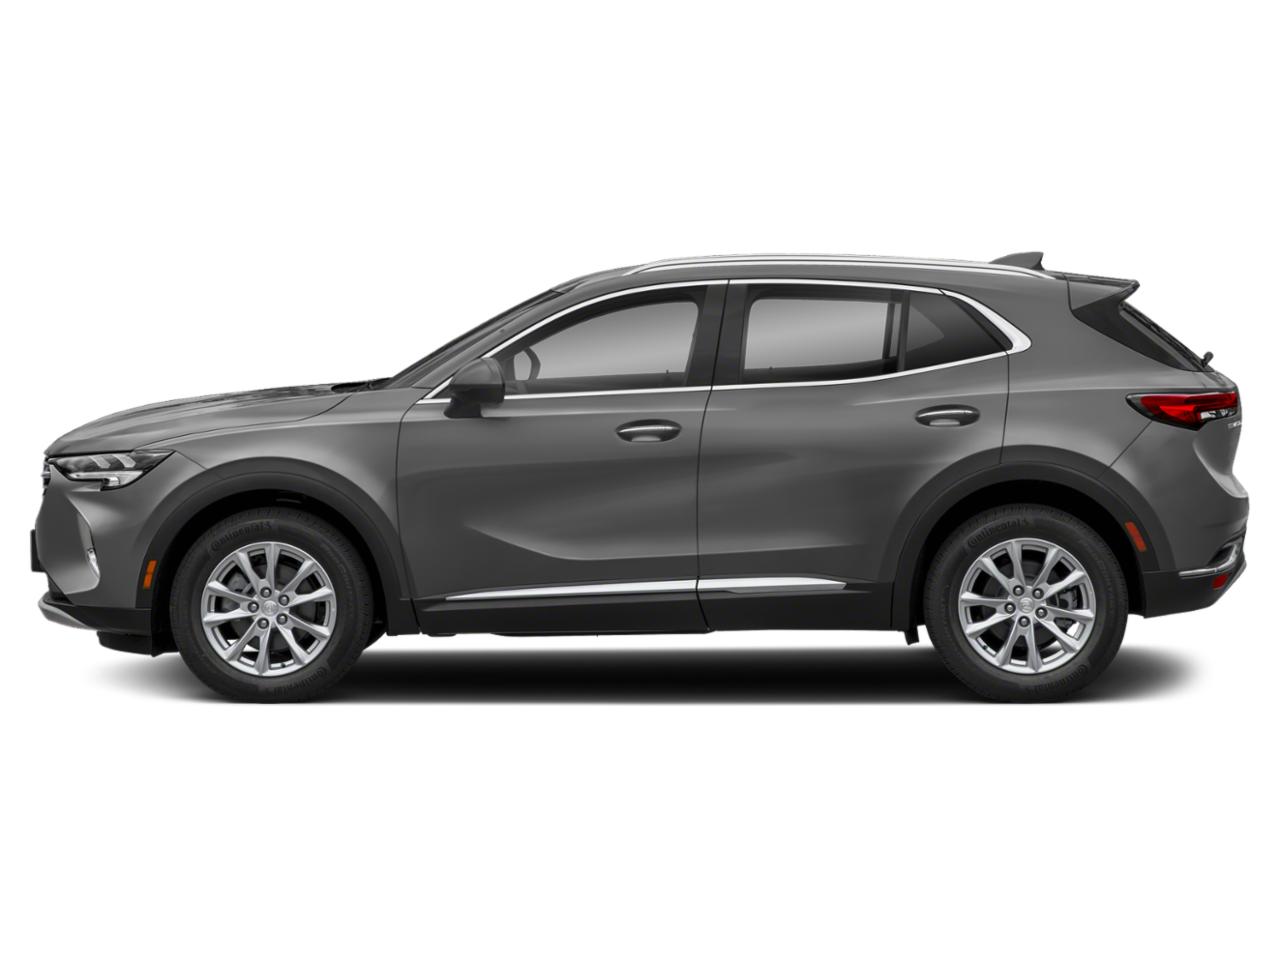 2021 Buick Envision Vehicle Photo in ELYRIA, OH 44035-6349